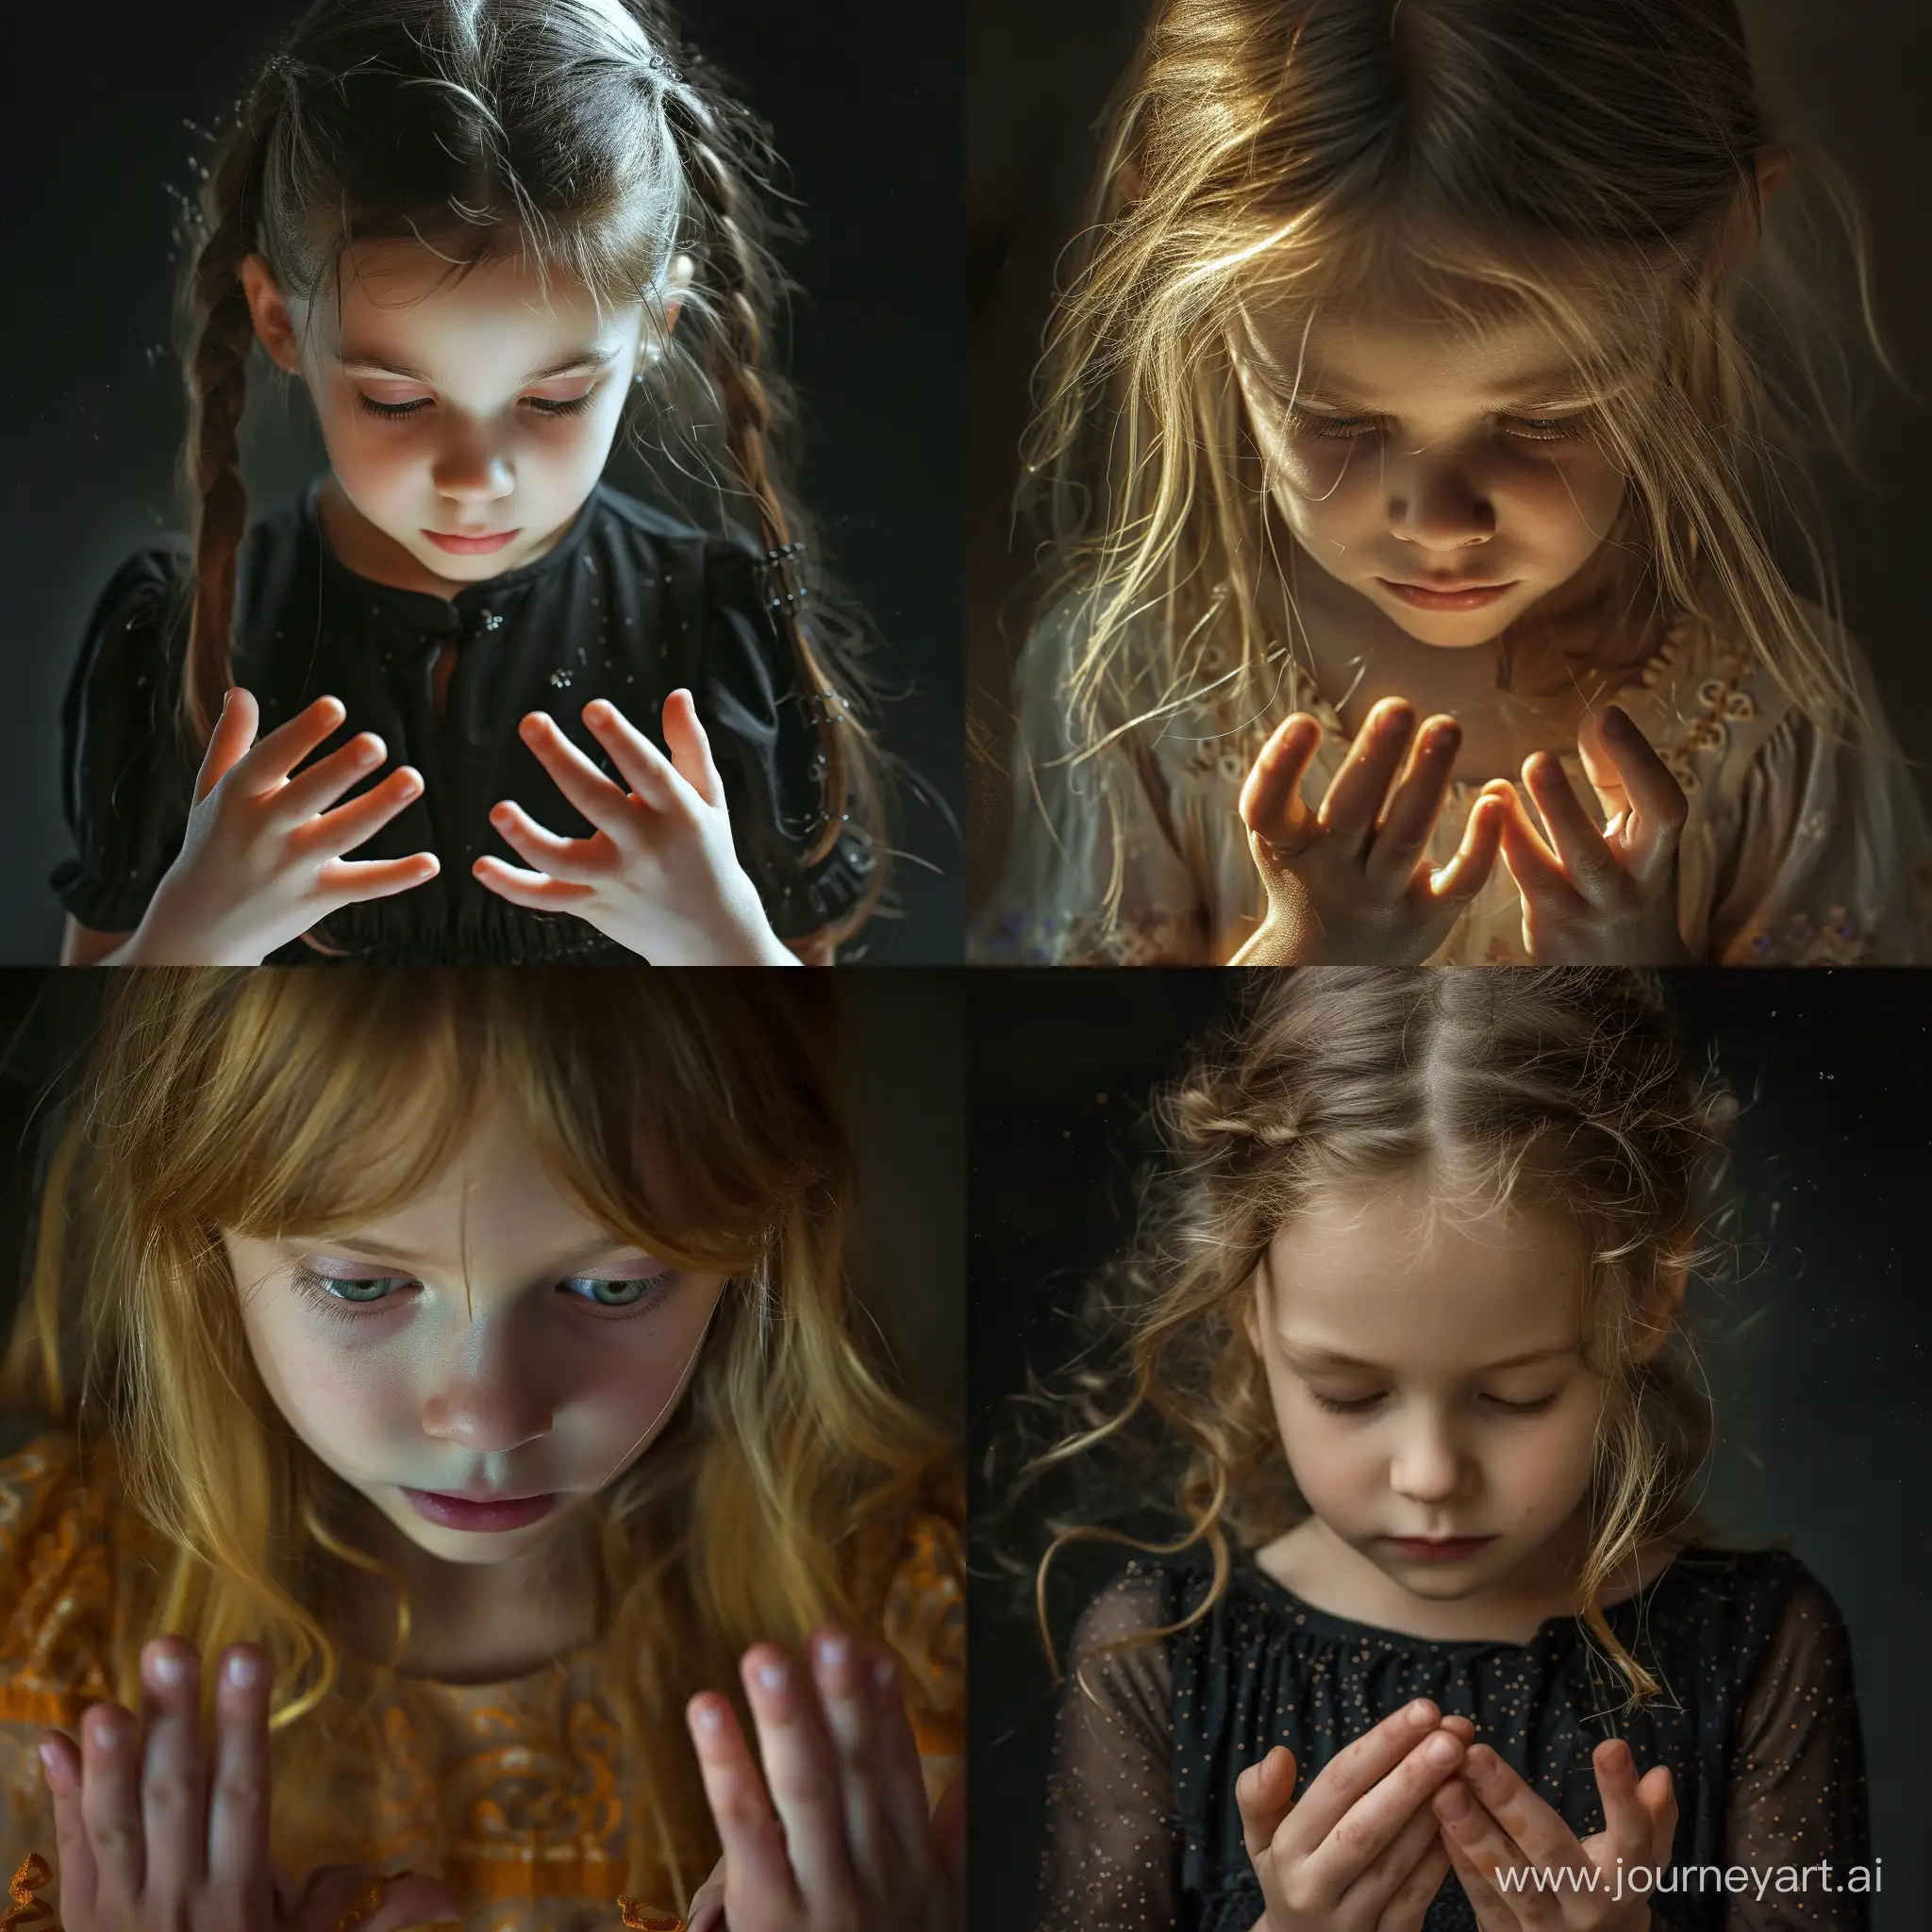 girl about ten years old looks down and shows 7 fingers, hd, photo realism